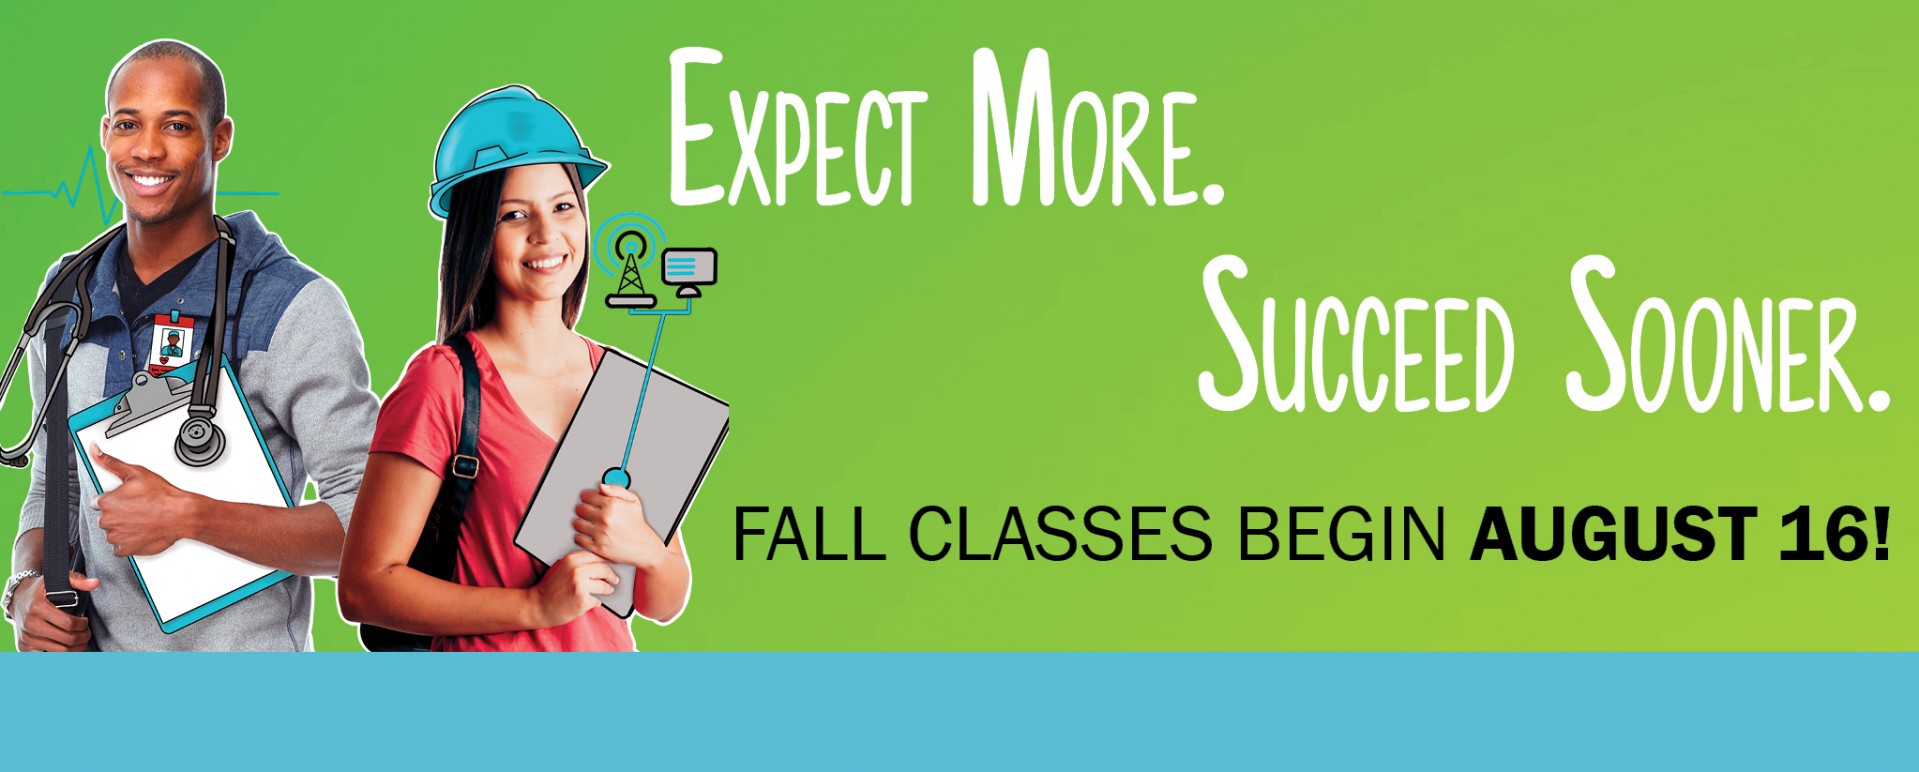 Fall classes begin August 16. Click here to apply!